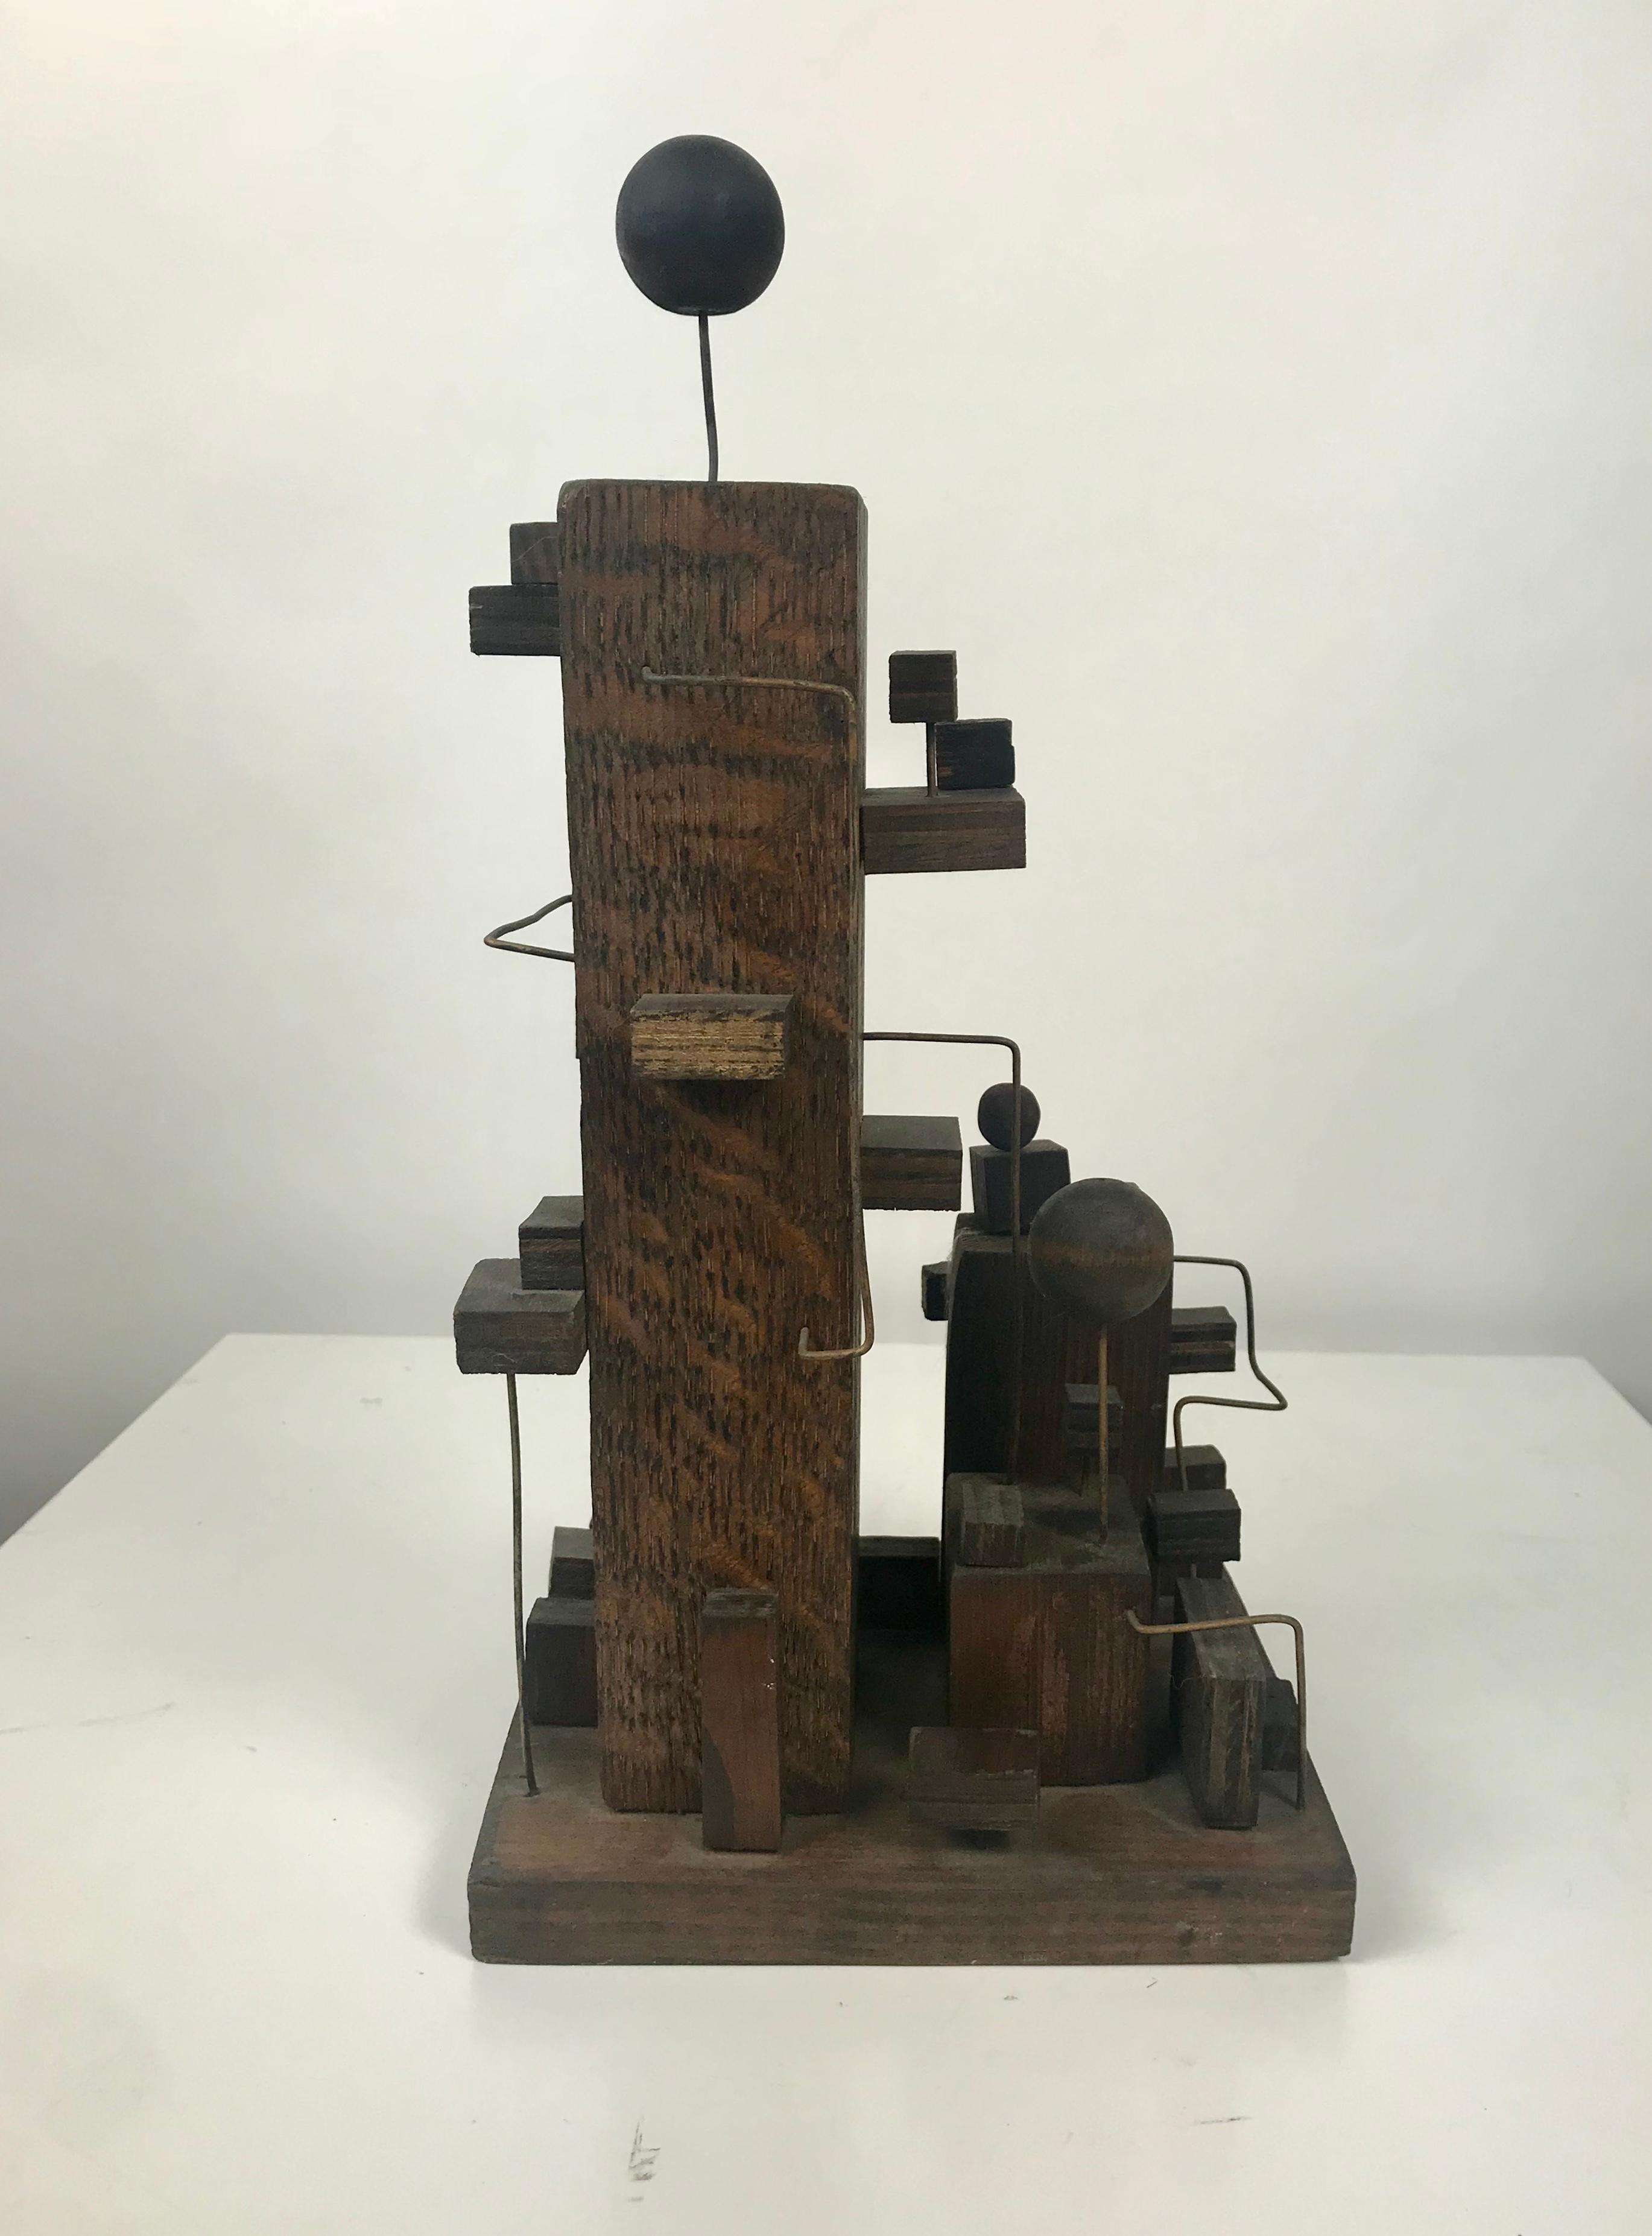 American Modern Constructivist Sculpture Wood and Metal, Folk Art In Distressed Condition In Buffalo, NY